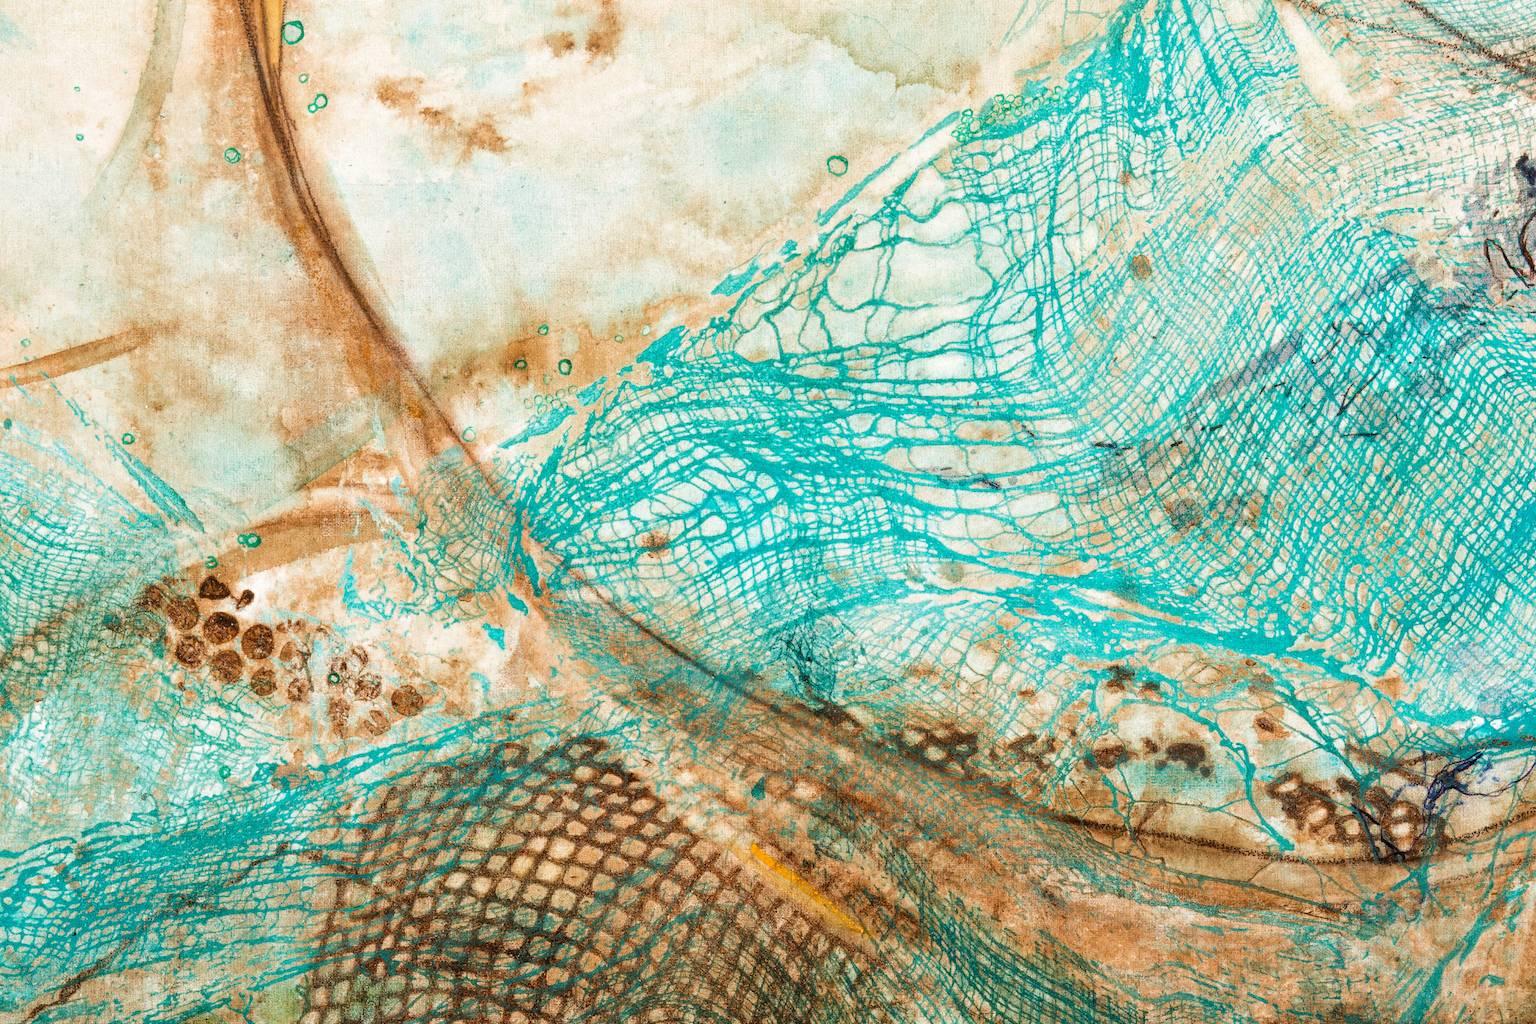 Sarah Alexander’s “In Flux” is a 54 x 44 x 1.5-inch painting created with watercolor, charcoal, and pen and ink drawn onto a specially treated watercolor canvas. Rich washes of bright turquoise, earthy browns, and gold accents drift, swirl and float